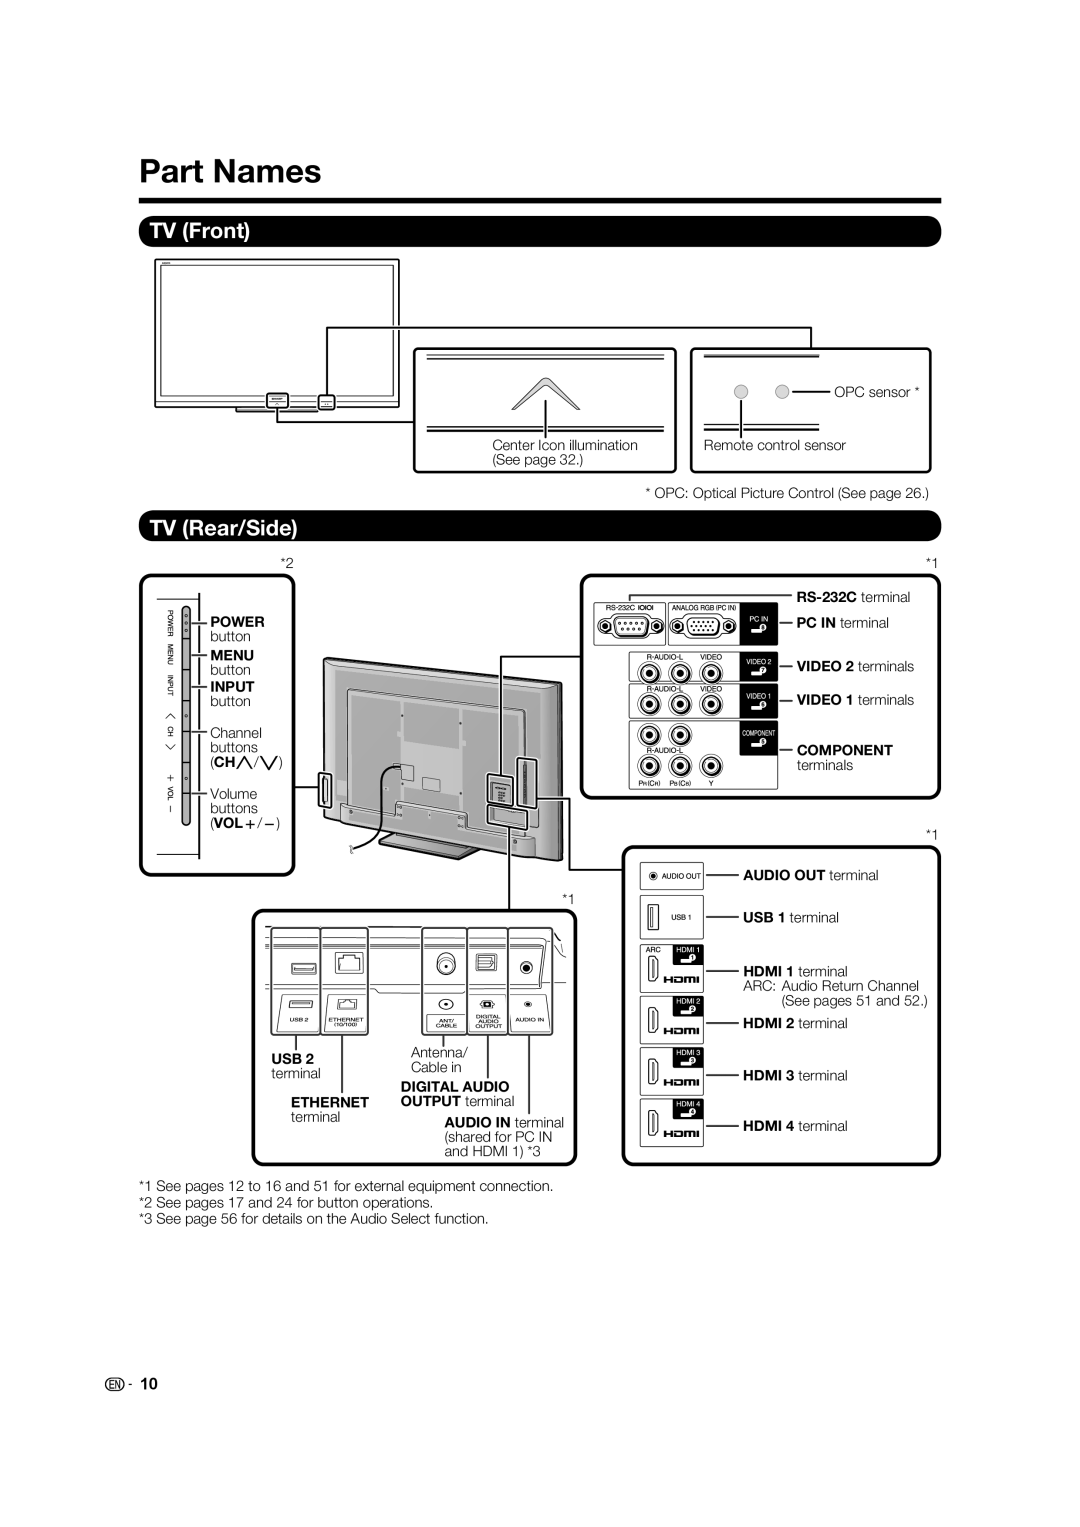 Sharp LC-70LE734U operation manual Part Names, TV Front, TV Rear/Side 